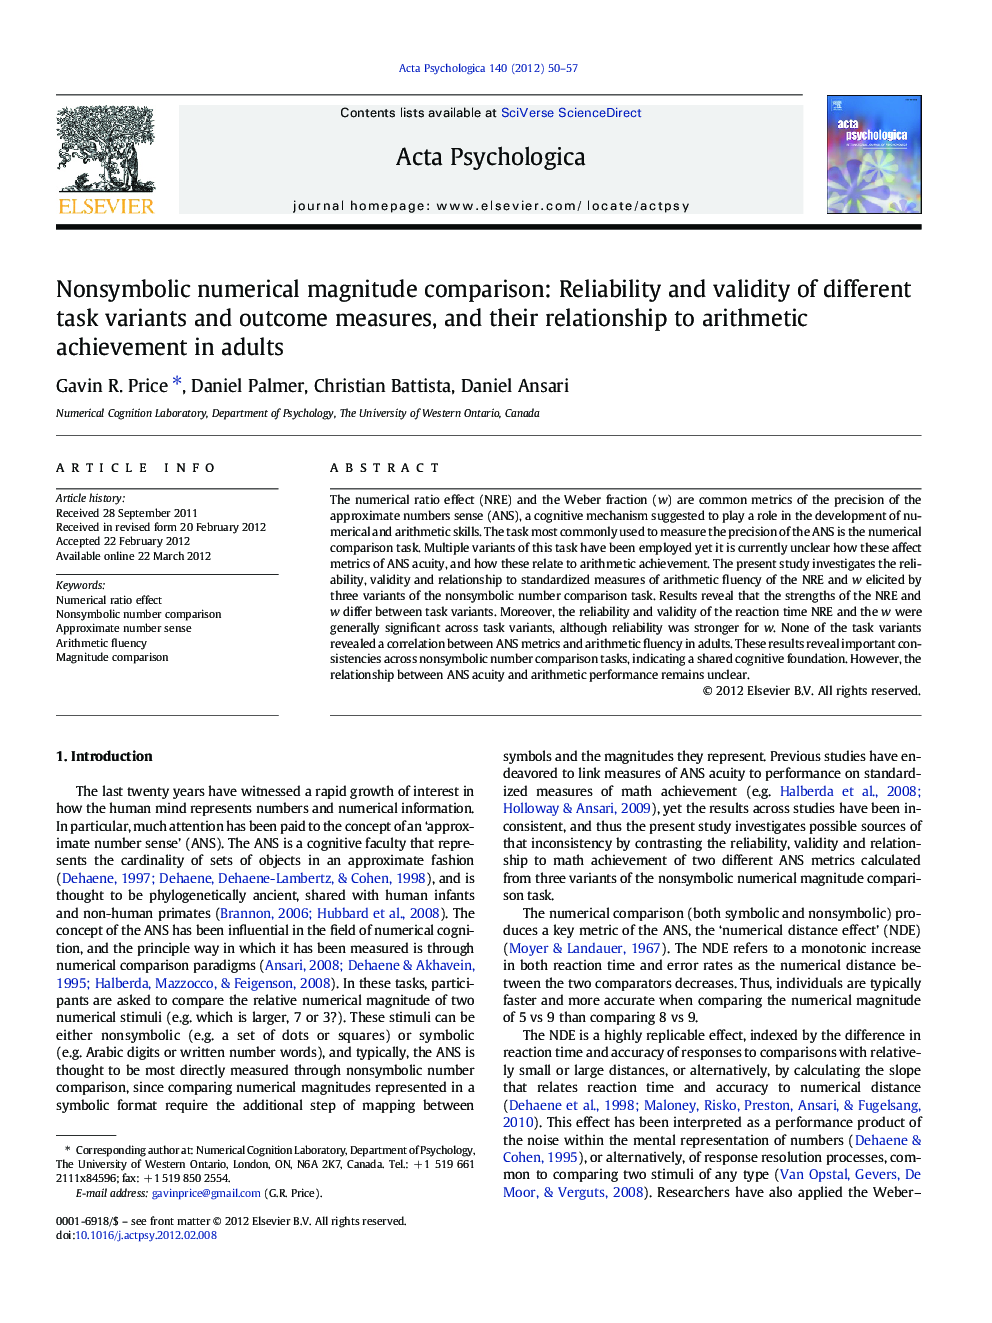 Nonsymbolic numerical magnitude comparison: Reliability and validity of different task variants and outcome measures, and their relationship to arithmetic achievement in adults